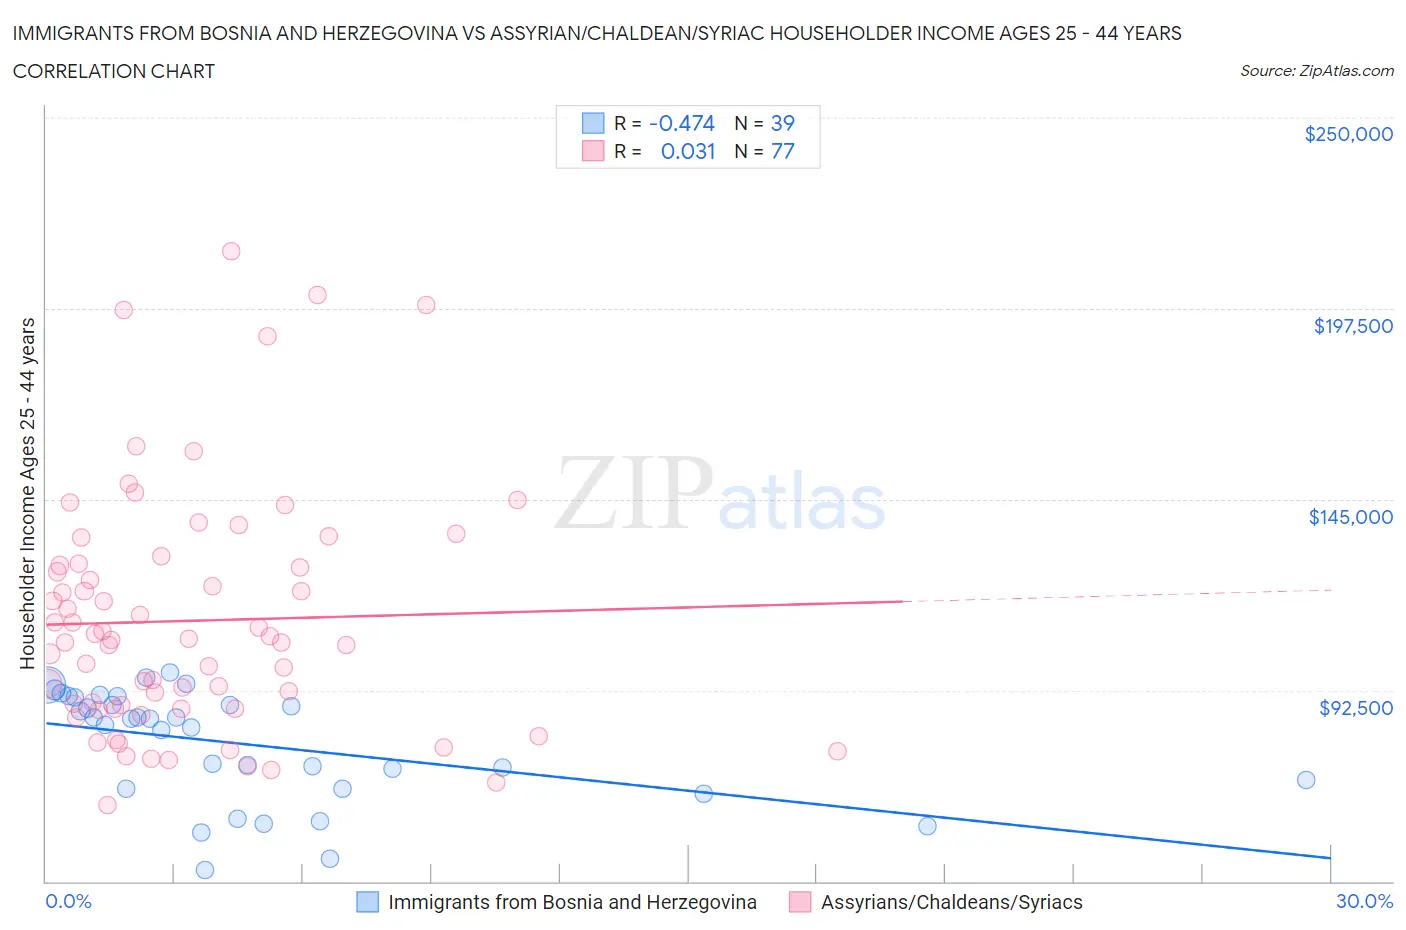 Immigrants from Bosnia and Herzegovina vs Assyrian/Chaldean/Syriac Householder Income Ages 25 - 44 years